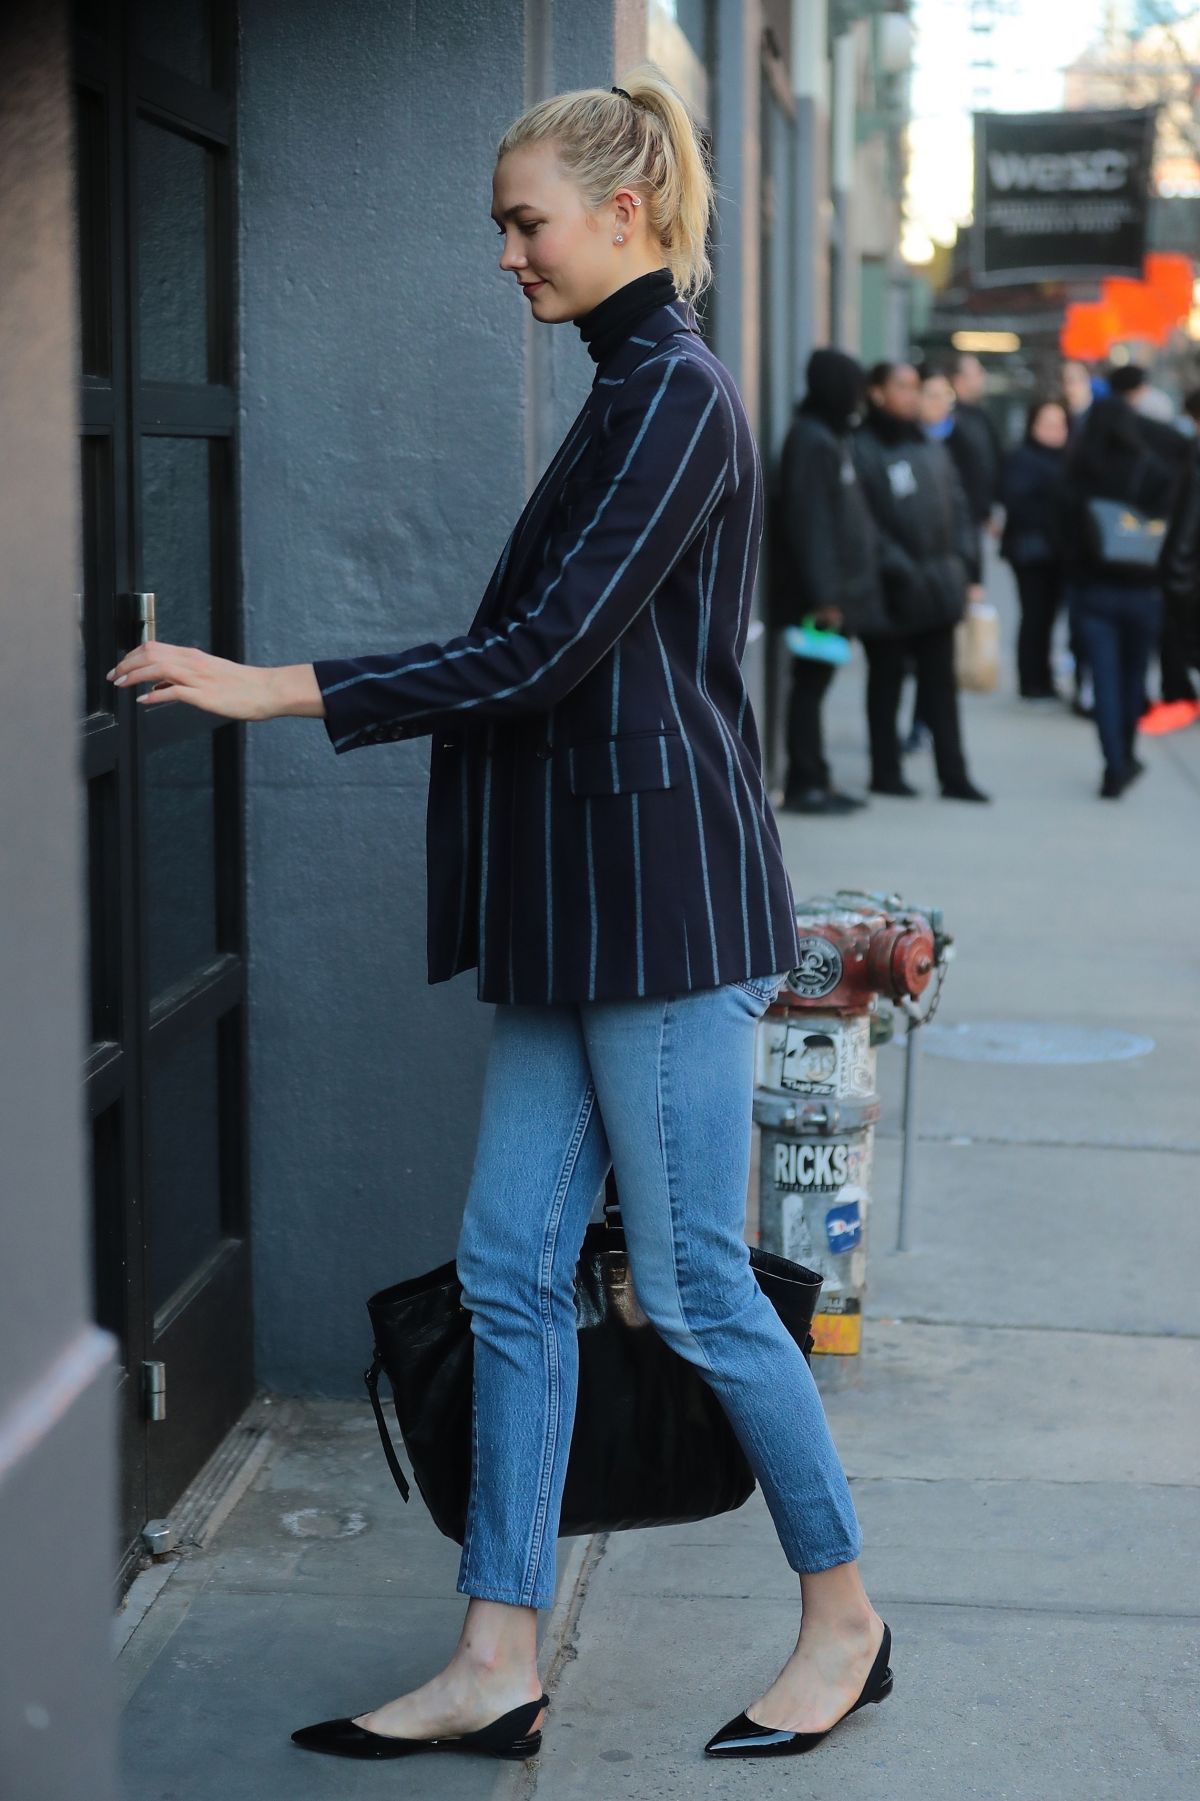 KARLIE KLOSS in Jeans Out in New York 03/26/2018 – HawtCelebs